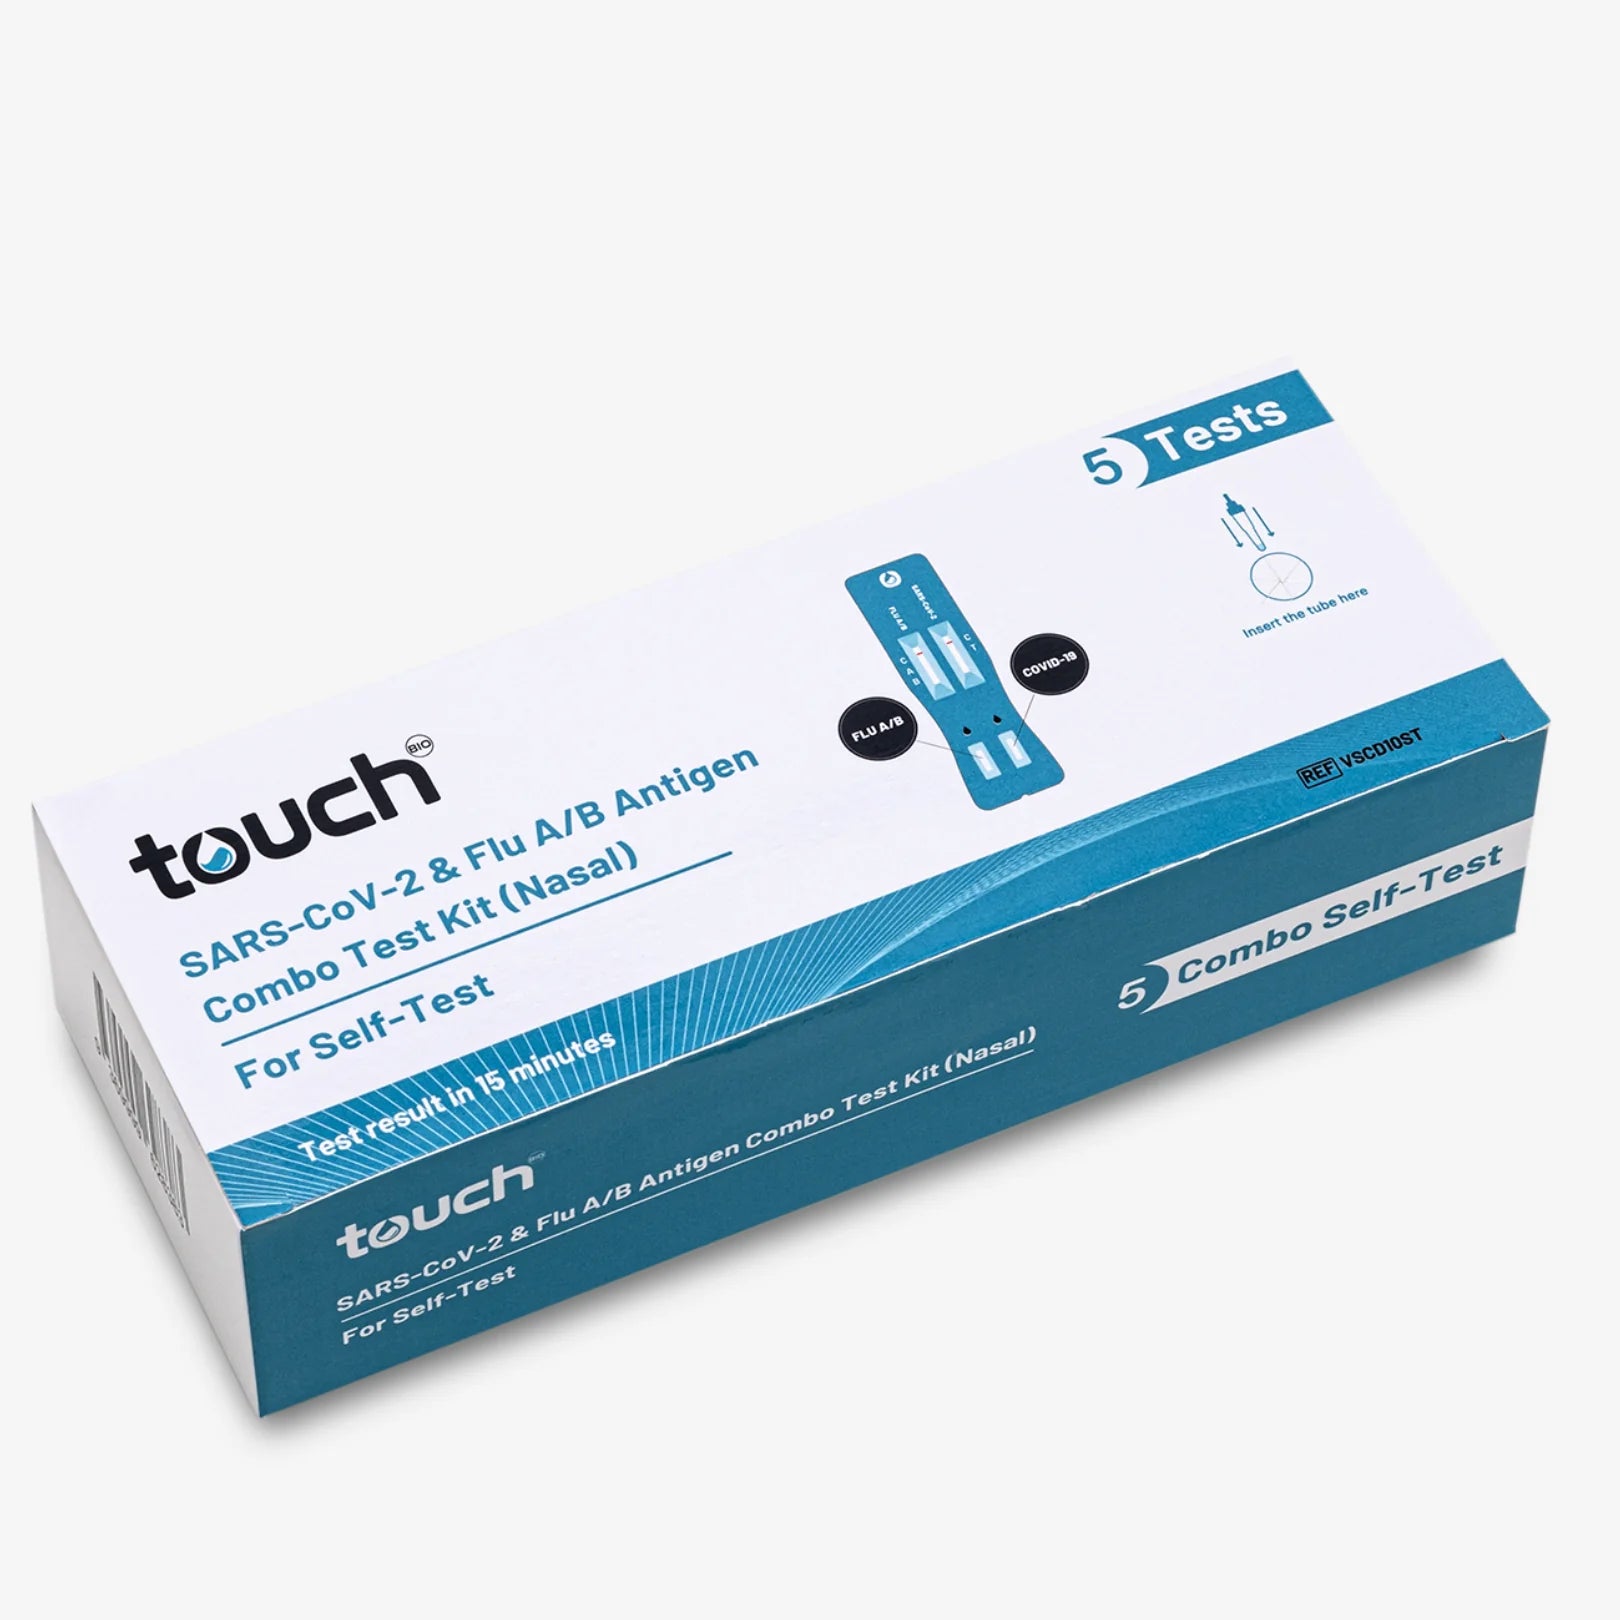 Touch 4 in 1 Rapid Combo Tests